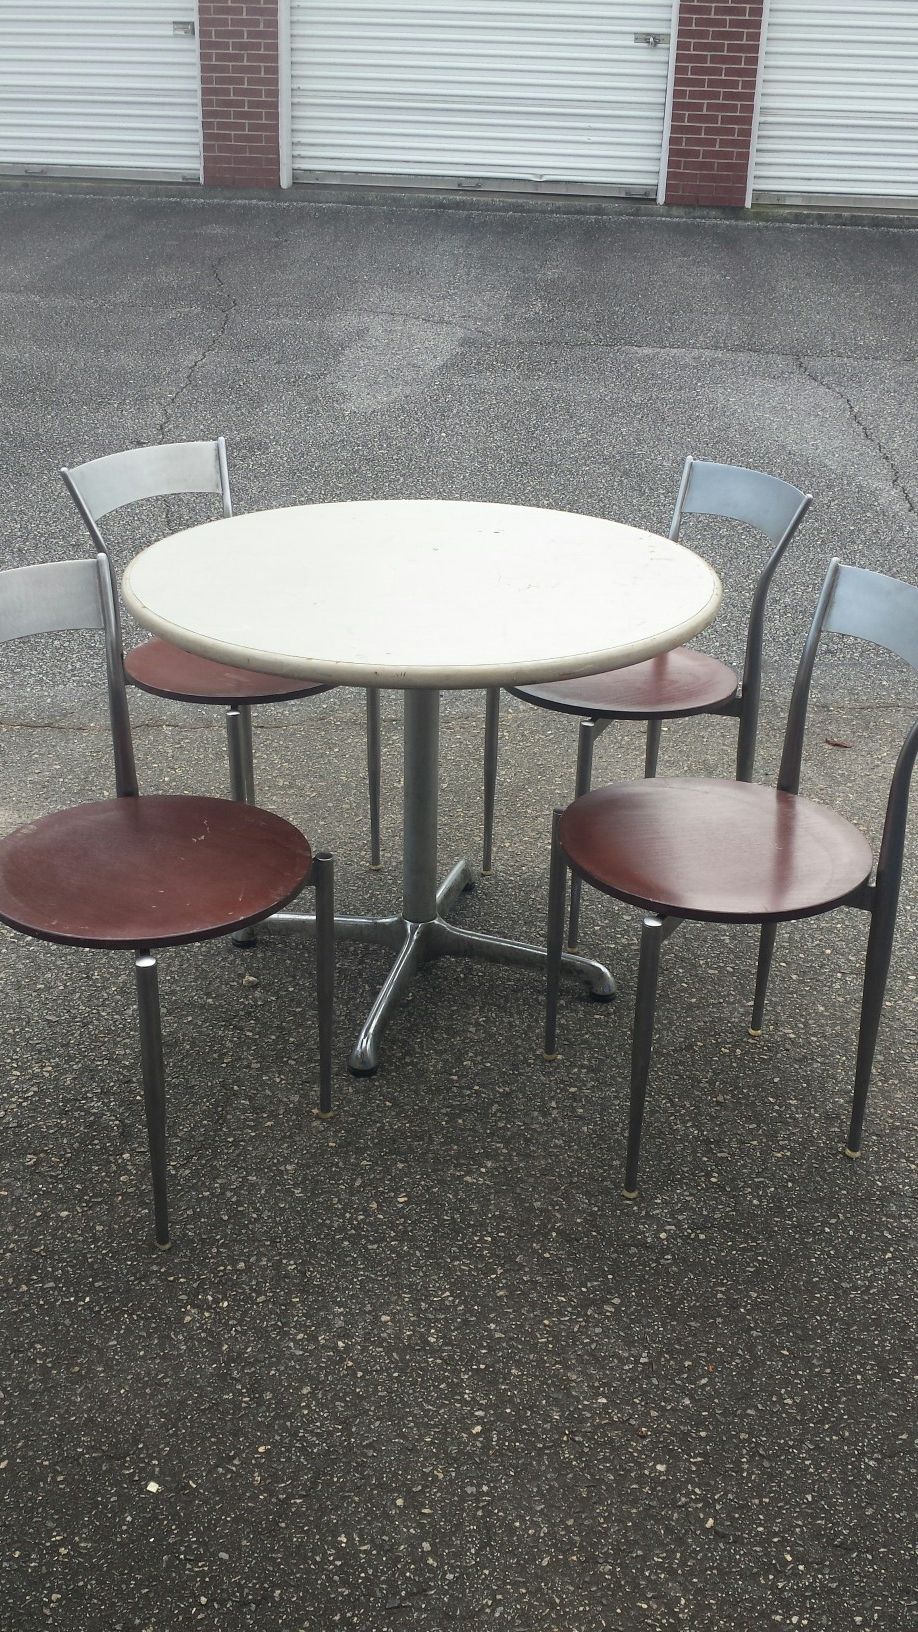 Table & 4 stainless steel chairs with wood bottom